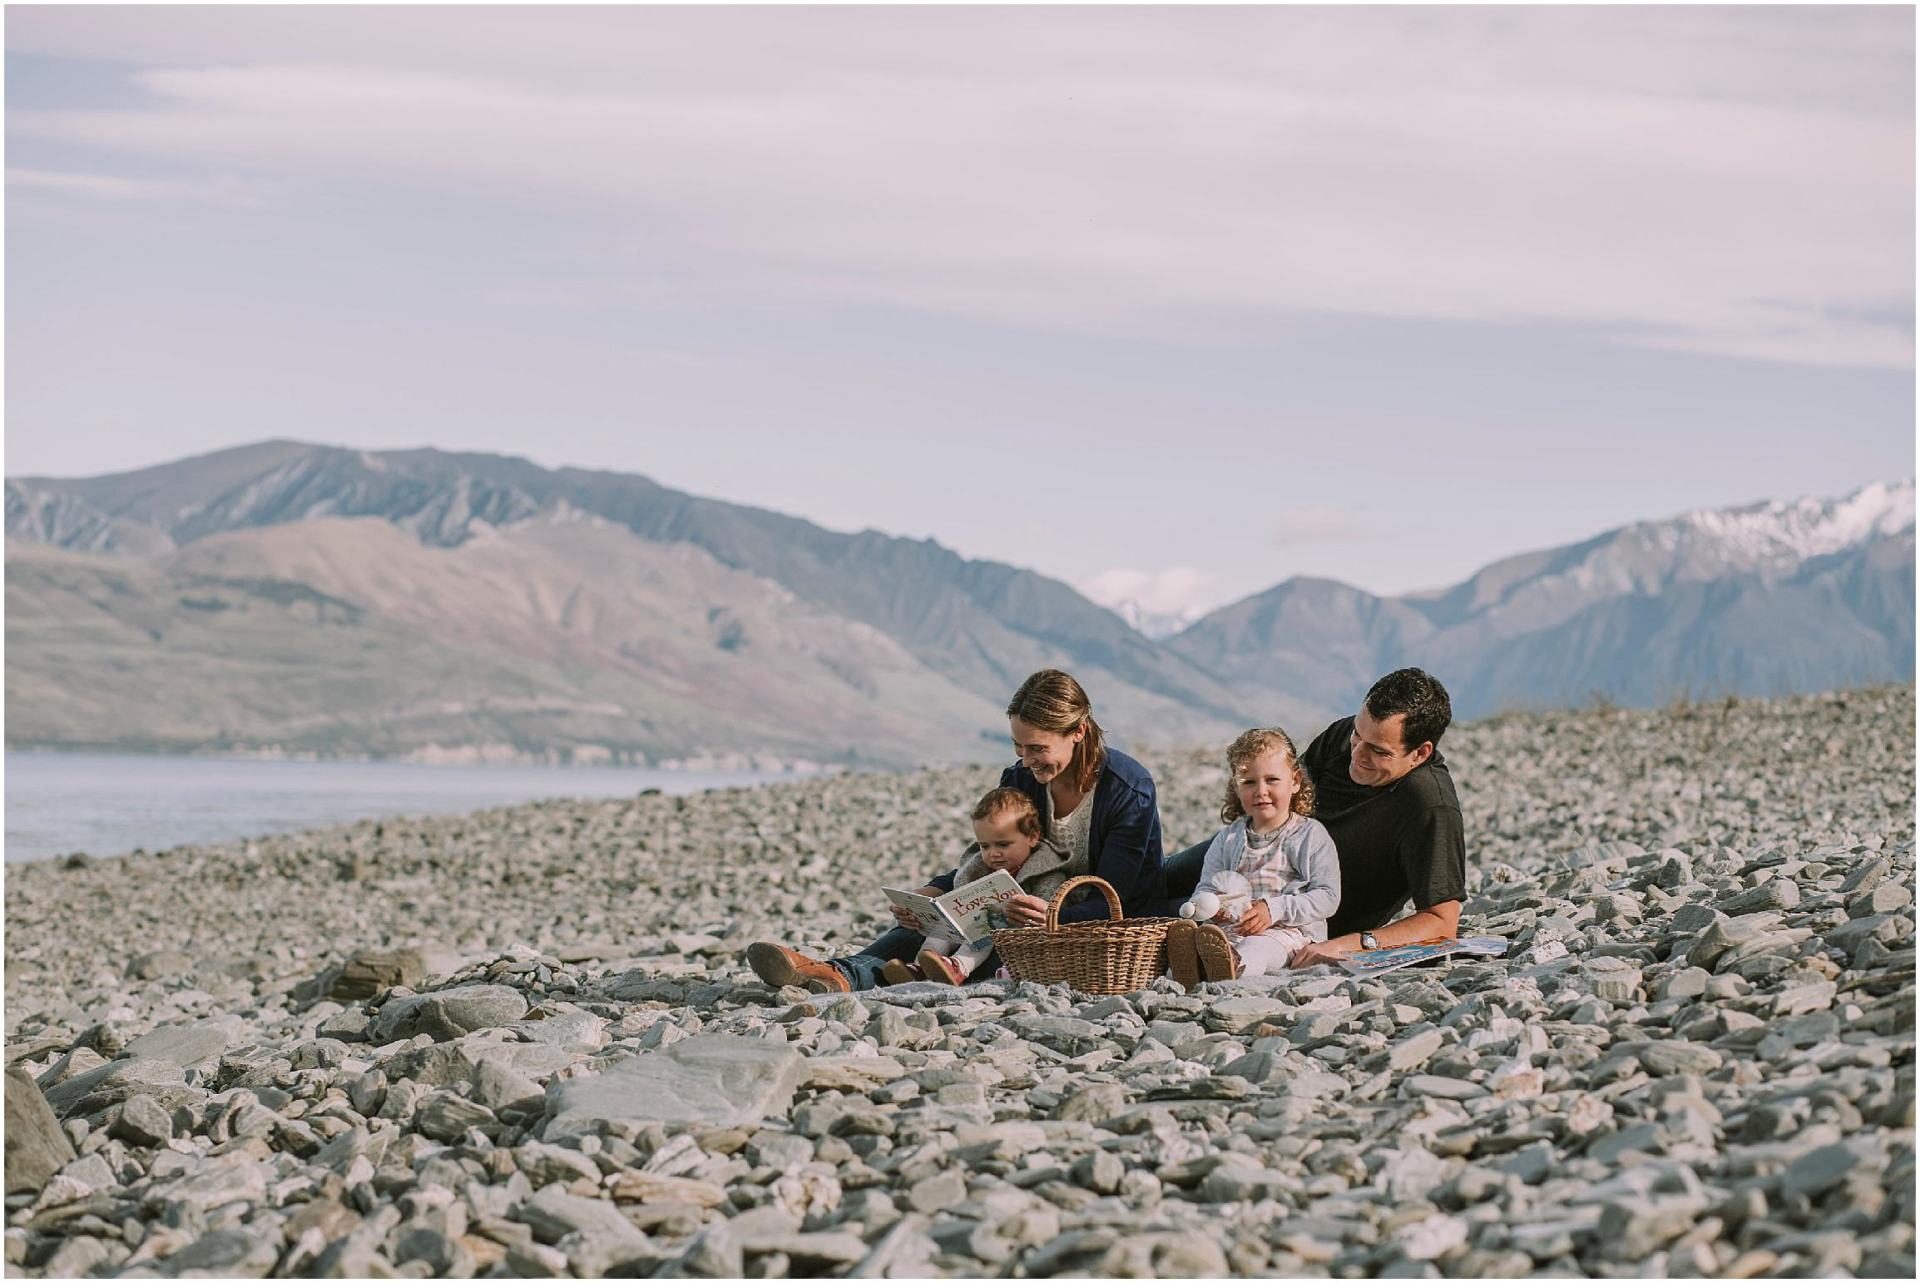 Charlotte Kiri Photography - Family Photography of a couple on a picnic blanket on the edge of a lake with mountains behind, while the mother reads to her young son, and the father looks adoringly at his daughter who is holding a soft toy in Wanaka, New Zealand.